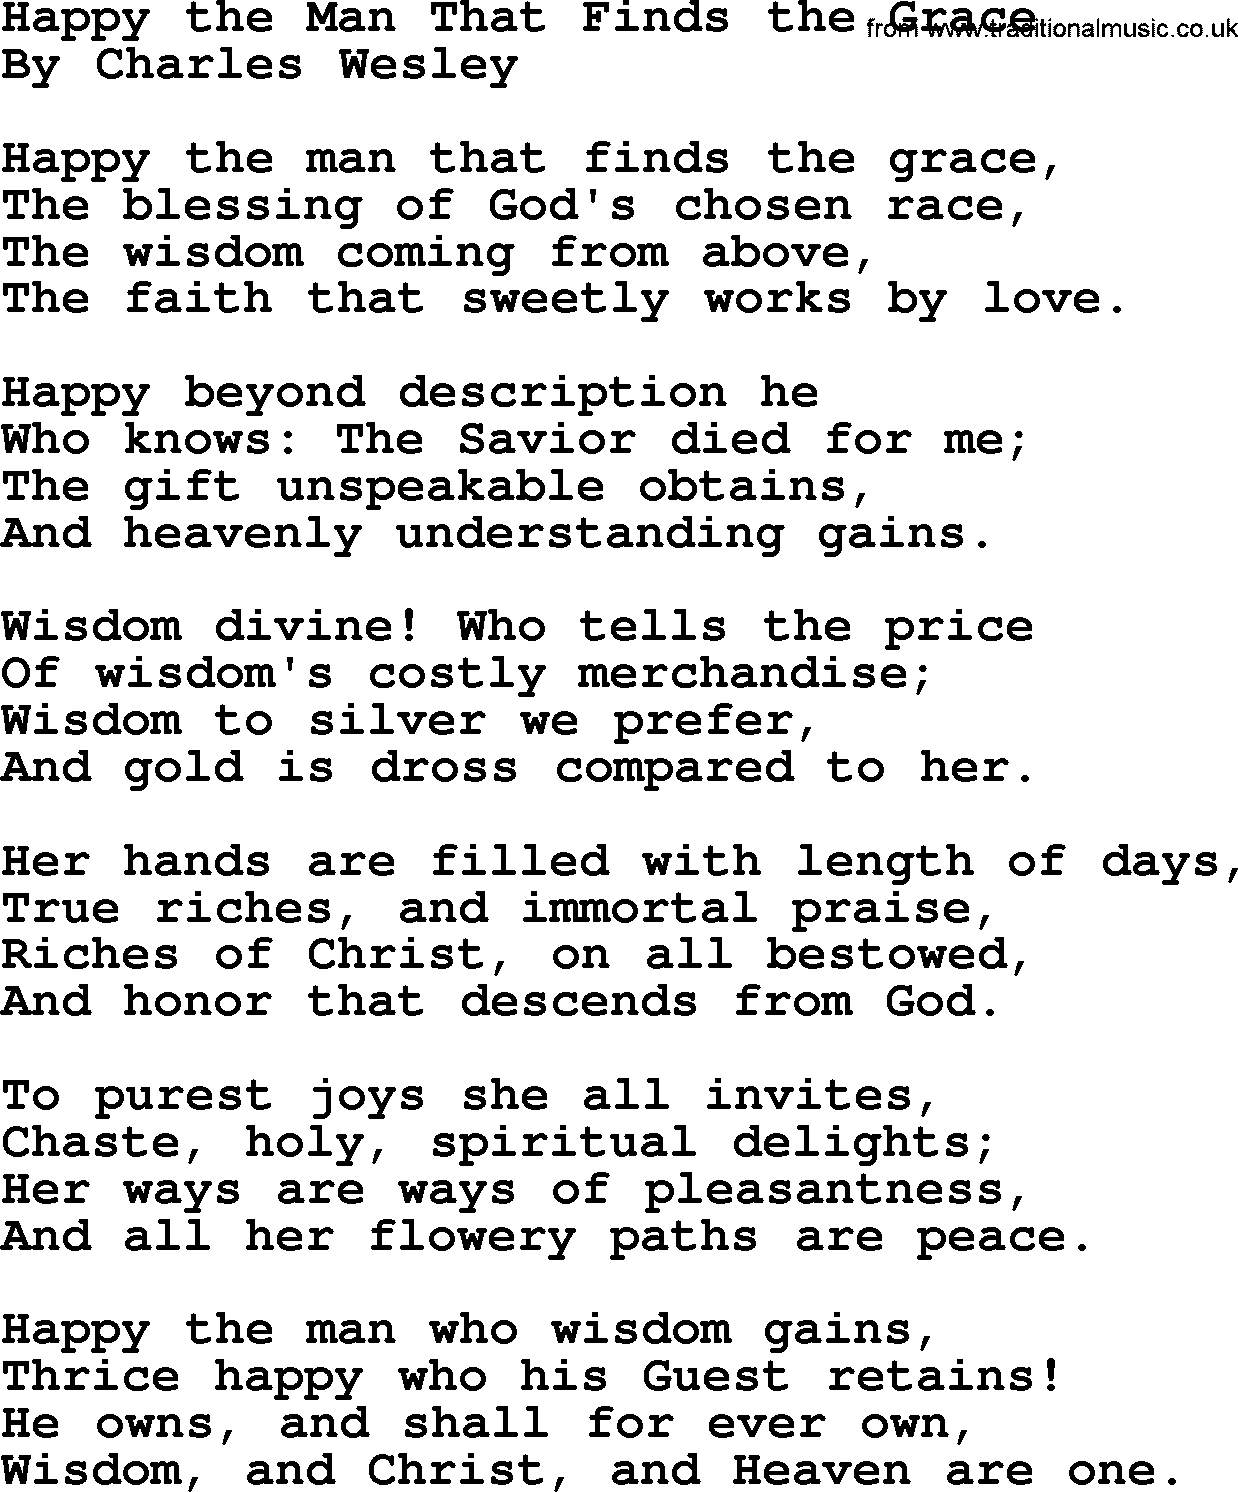 Charles Wesley hymn: Happy The Man That Finds The Grace, lyrics